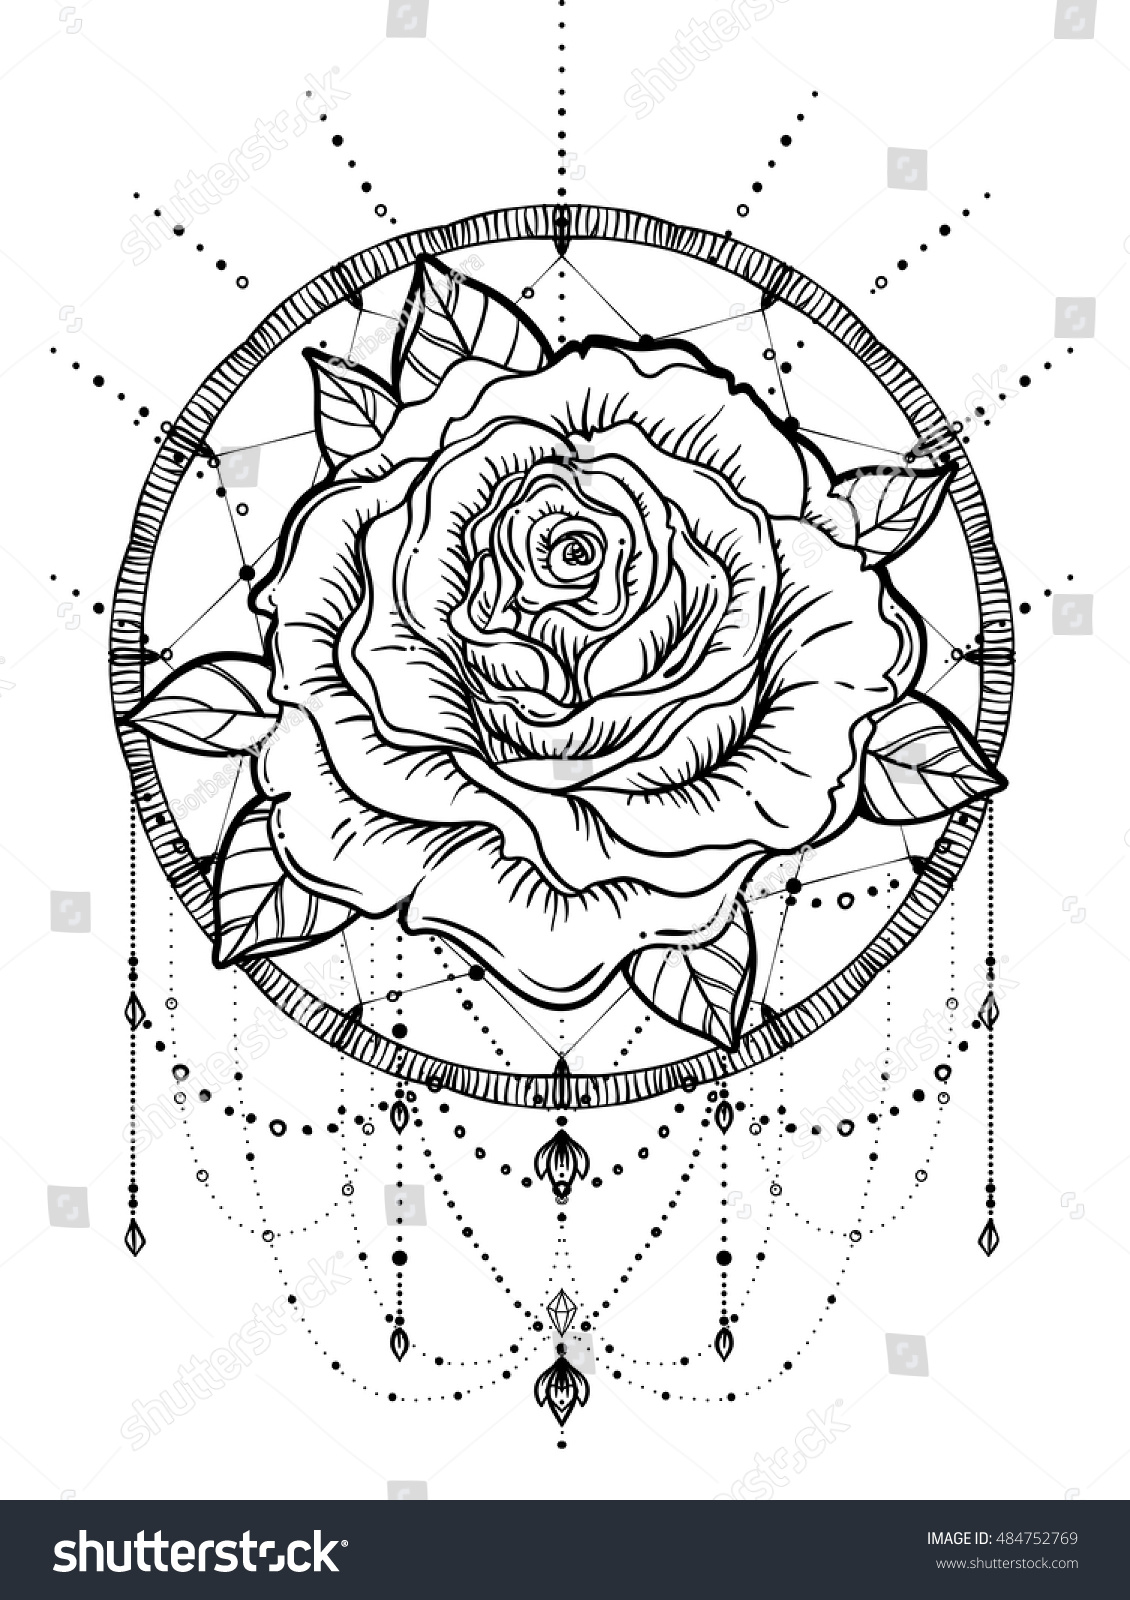 SVG of Dream catcher with rose flower, detailed vector illustration isolated on white. Blackwork tattoo flash, mystic symbol. New school dotwork. Boho design. Print, posters, t-shirts and textiles. svg